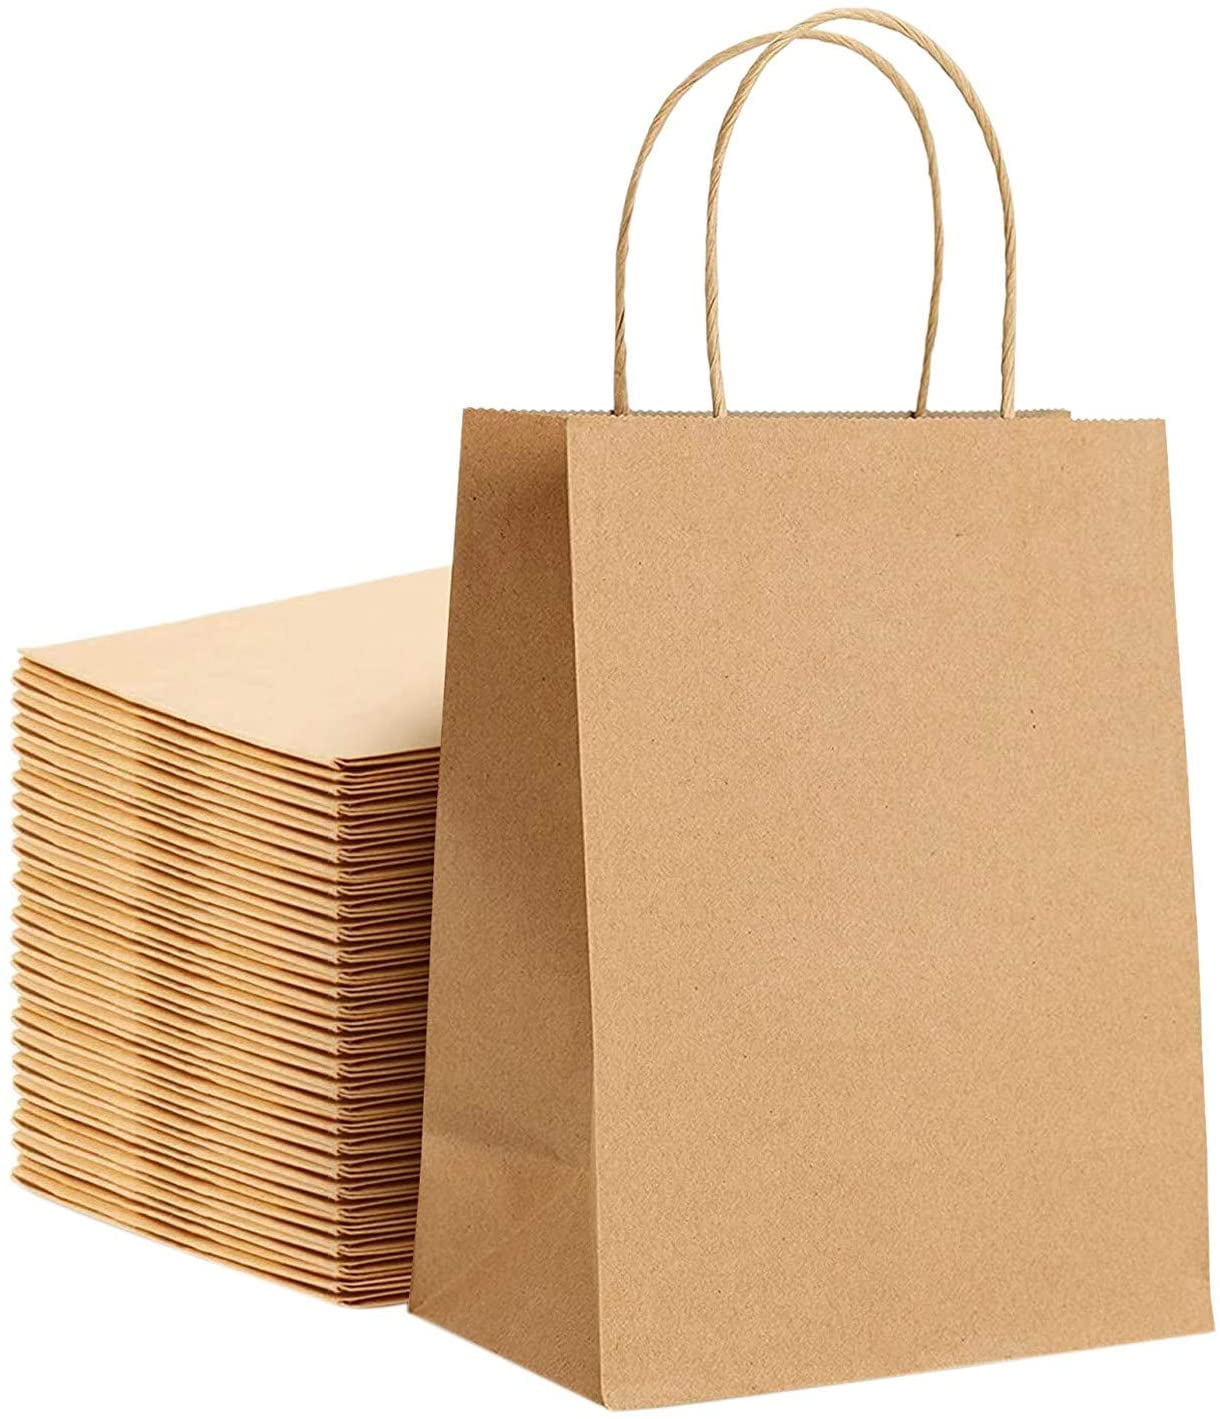 Creative Uses for Brown Paper Bags - Turning the Clock Back